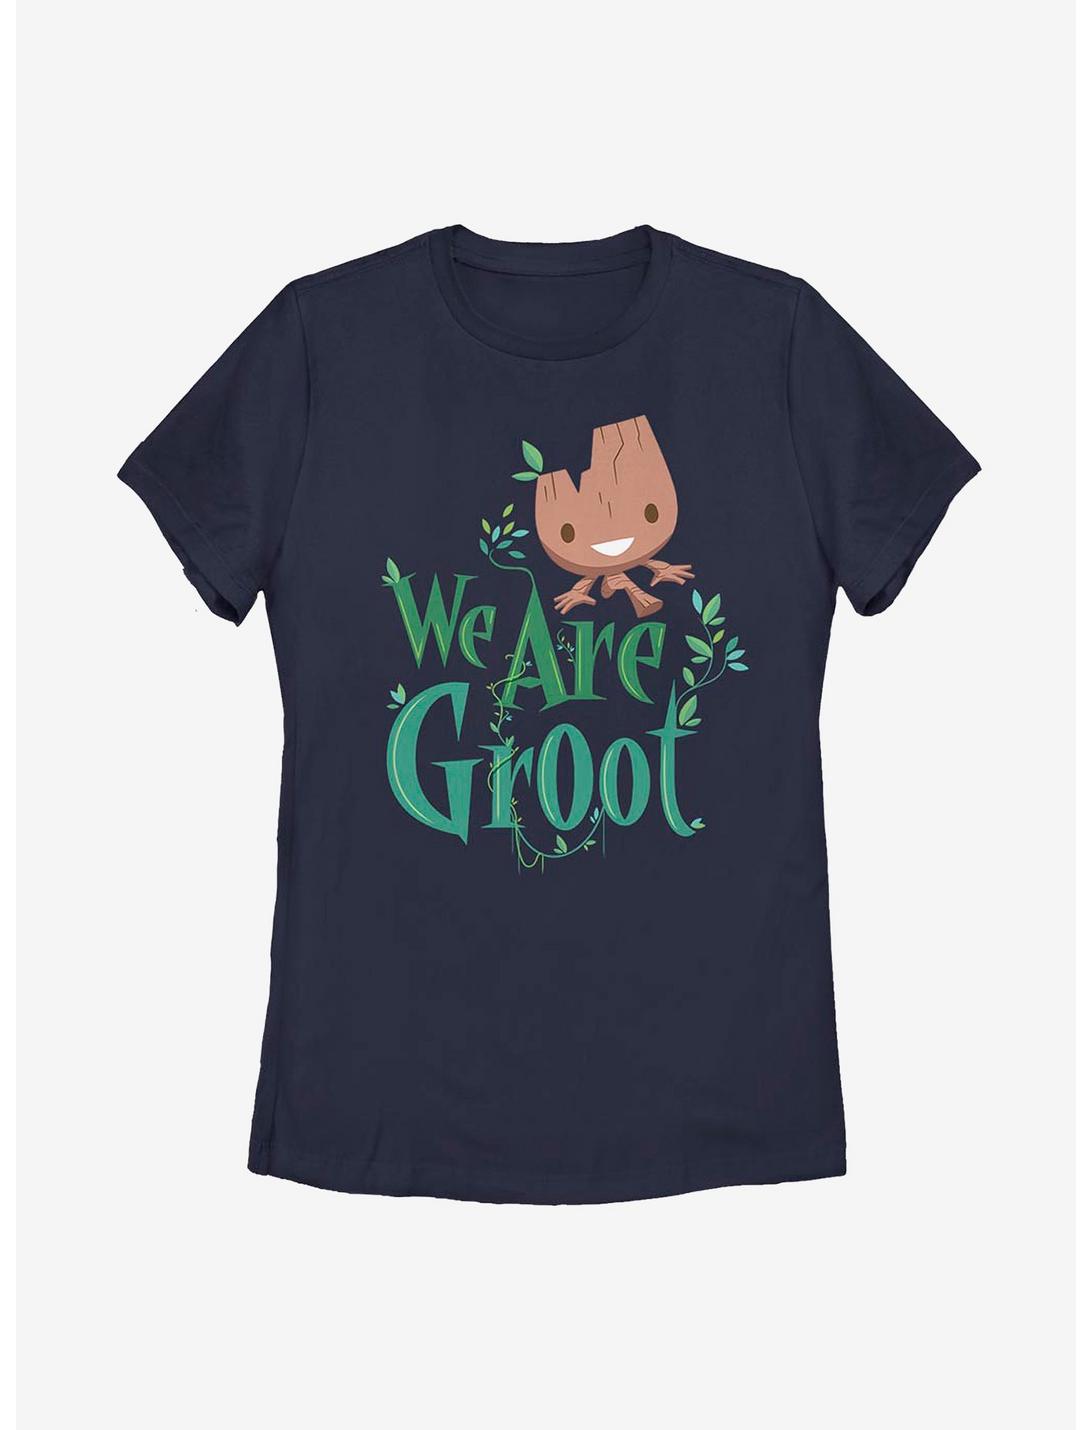 Marvel Guardians Of The Galaxy Groots World Womens T-Shirt, NAVY, hi-res